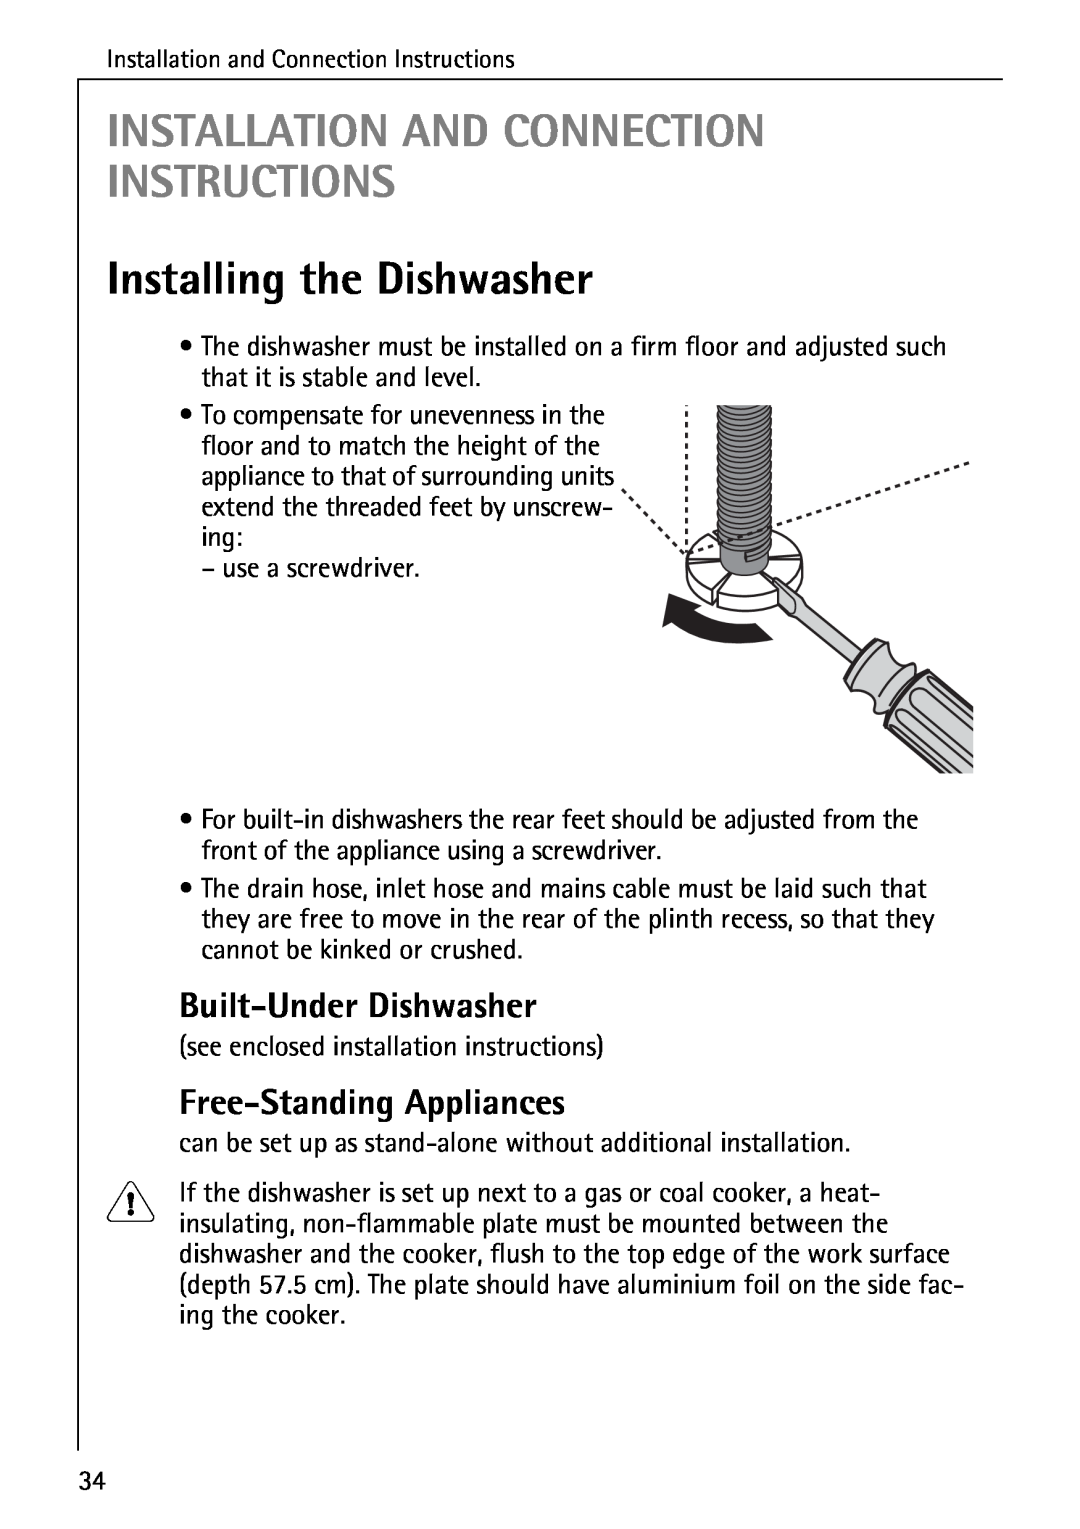 Electrolux 50610 manual Installation And Connection Instructions, Installing the Dishwasher, Built-Under Dishwasher 